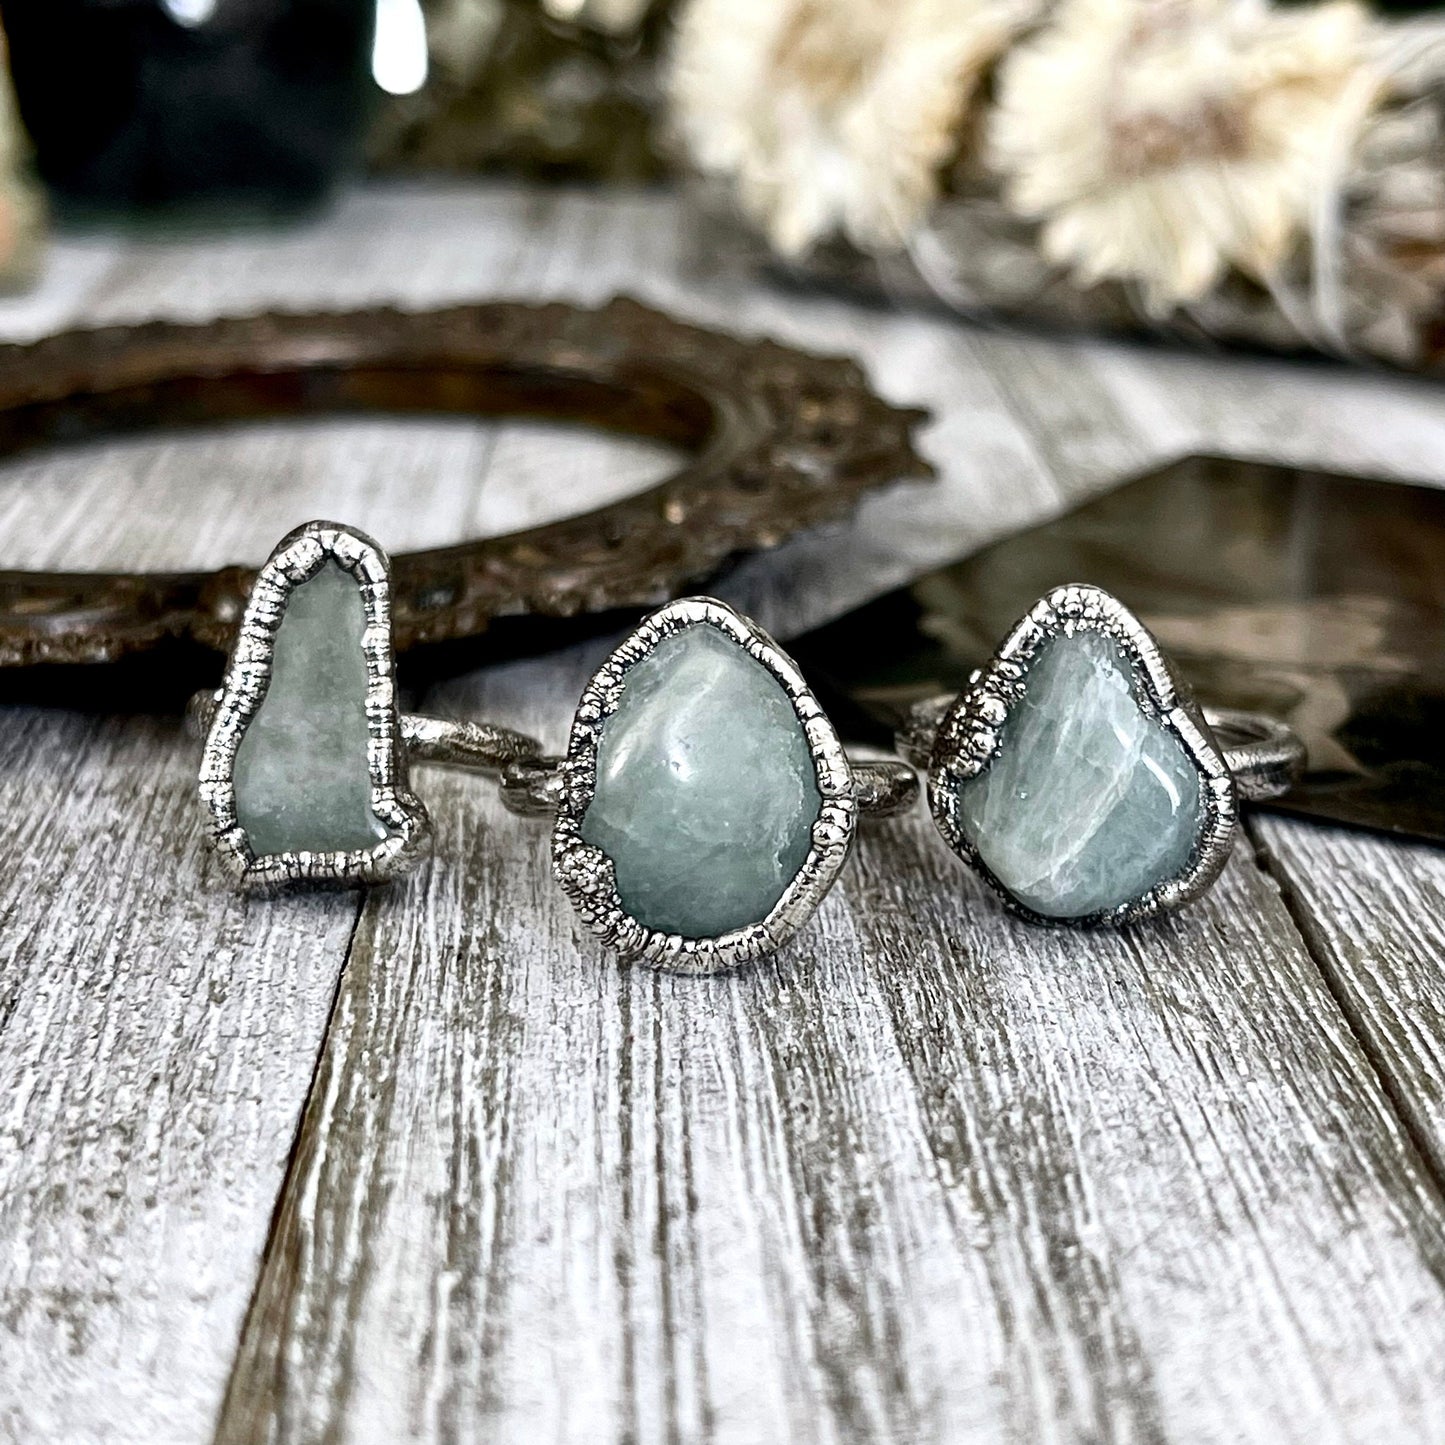 Blue Aquamarine Small Stone Ring in Fine Silver Size 7 8 / Foxlark Collection / Silver Crystal Ring / Electroformed Jewelry / Pebble Ring